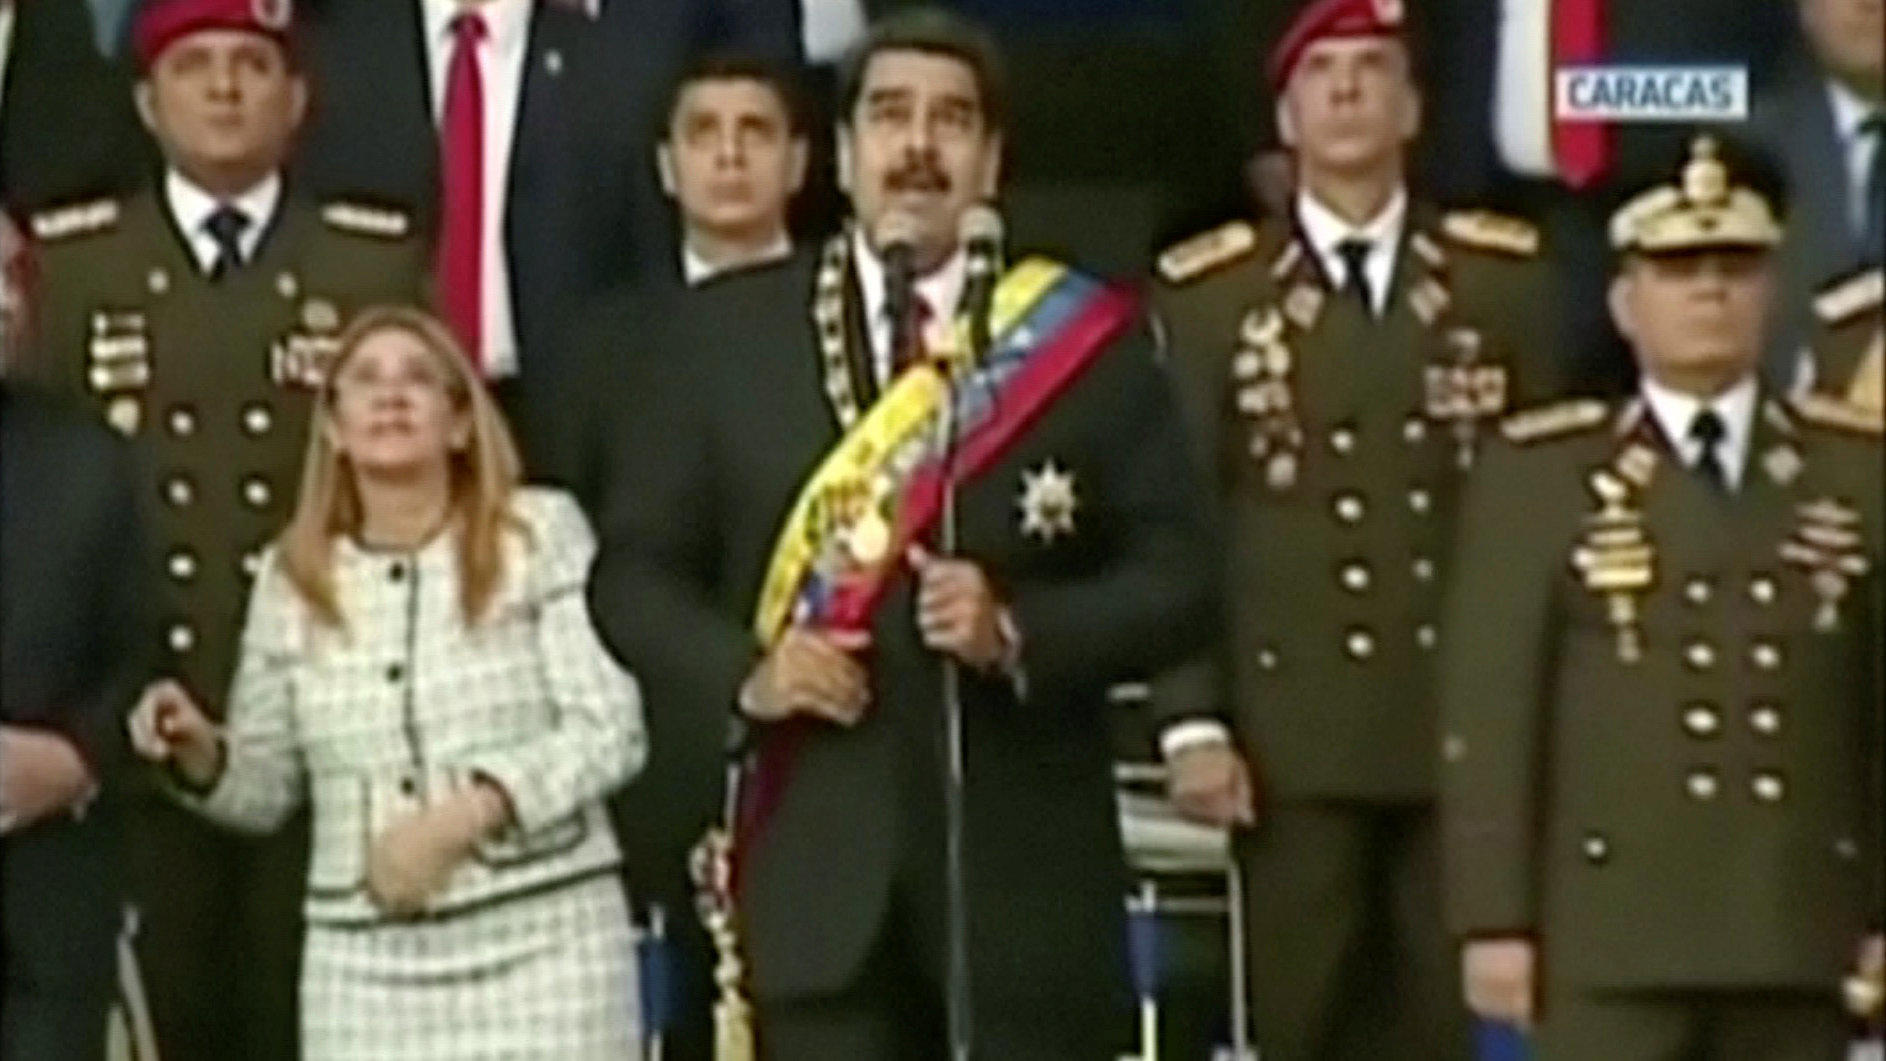 Venezuelan President Nicolas Maduro reacts during an event which was interrupted, in this still frame taken from video August 4, 2018, Caracas, Venezuela. VENEZUELAN GOVERNMENT TV/Handout via REUTERS TV.  ATTENTION EDITORS - THIS IMAGE HAS BEEN PROVI